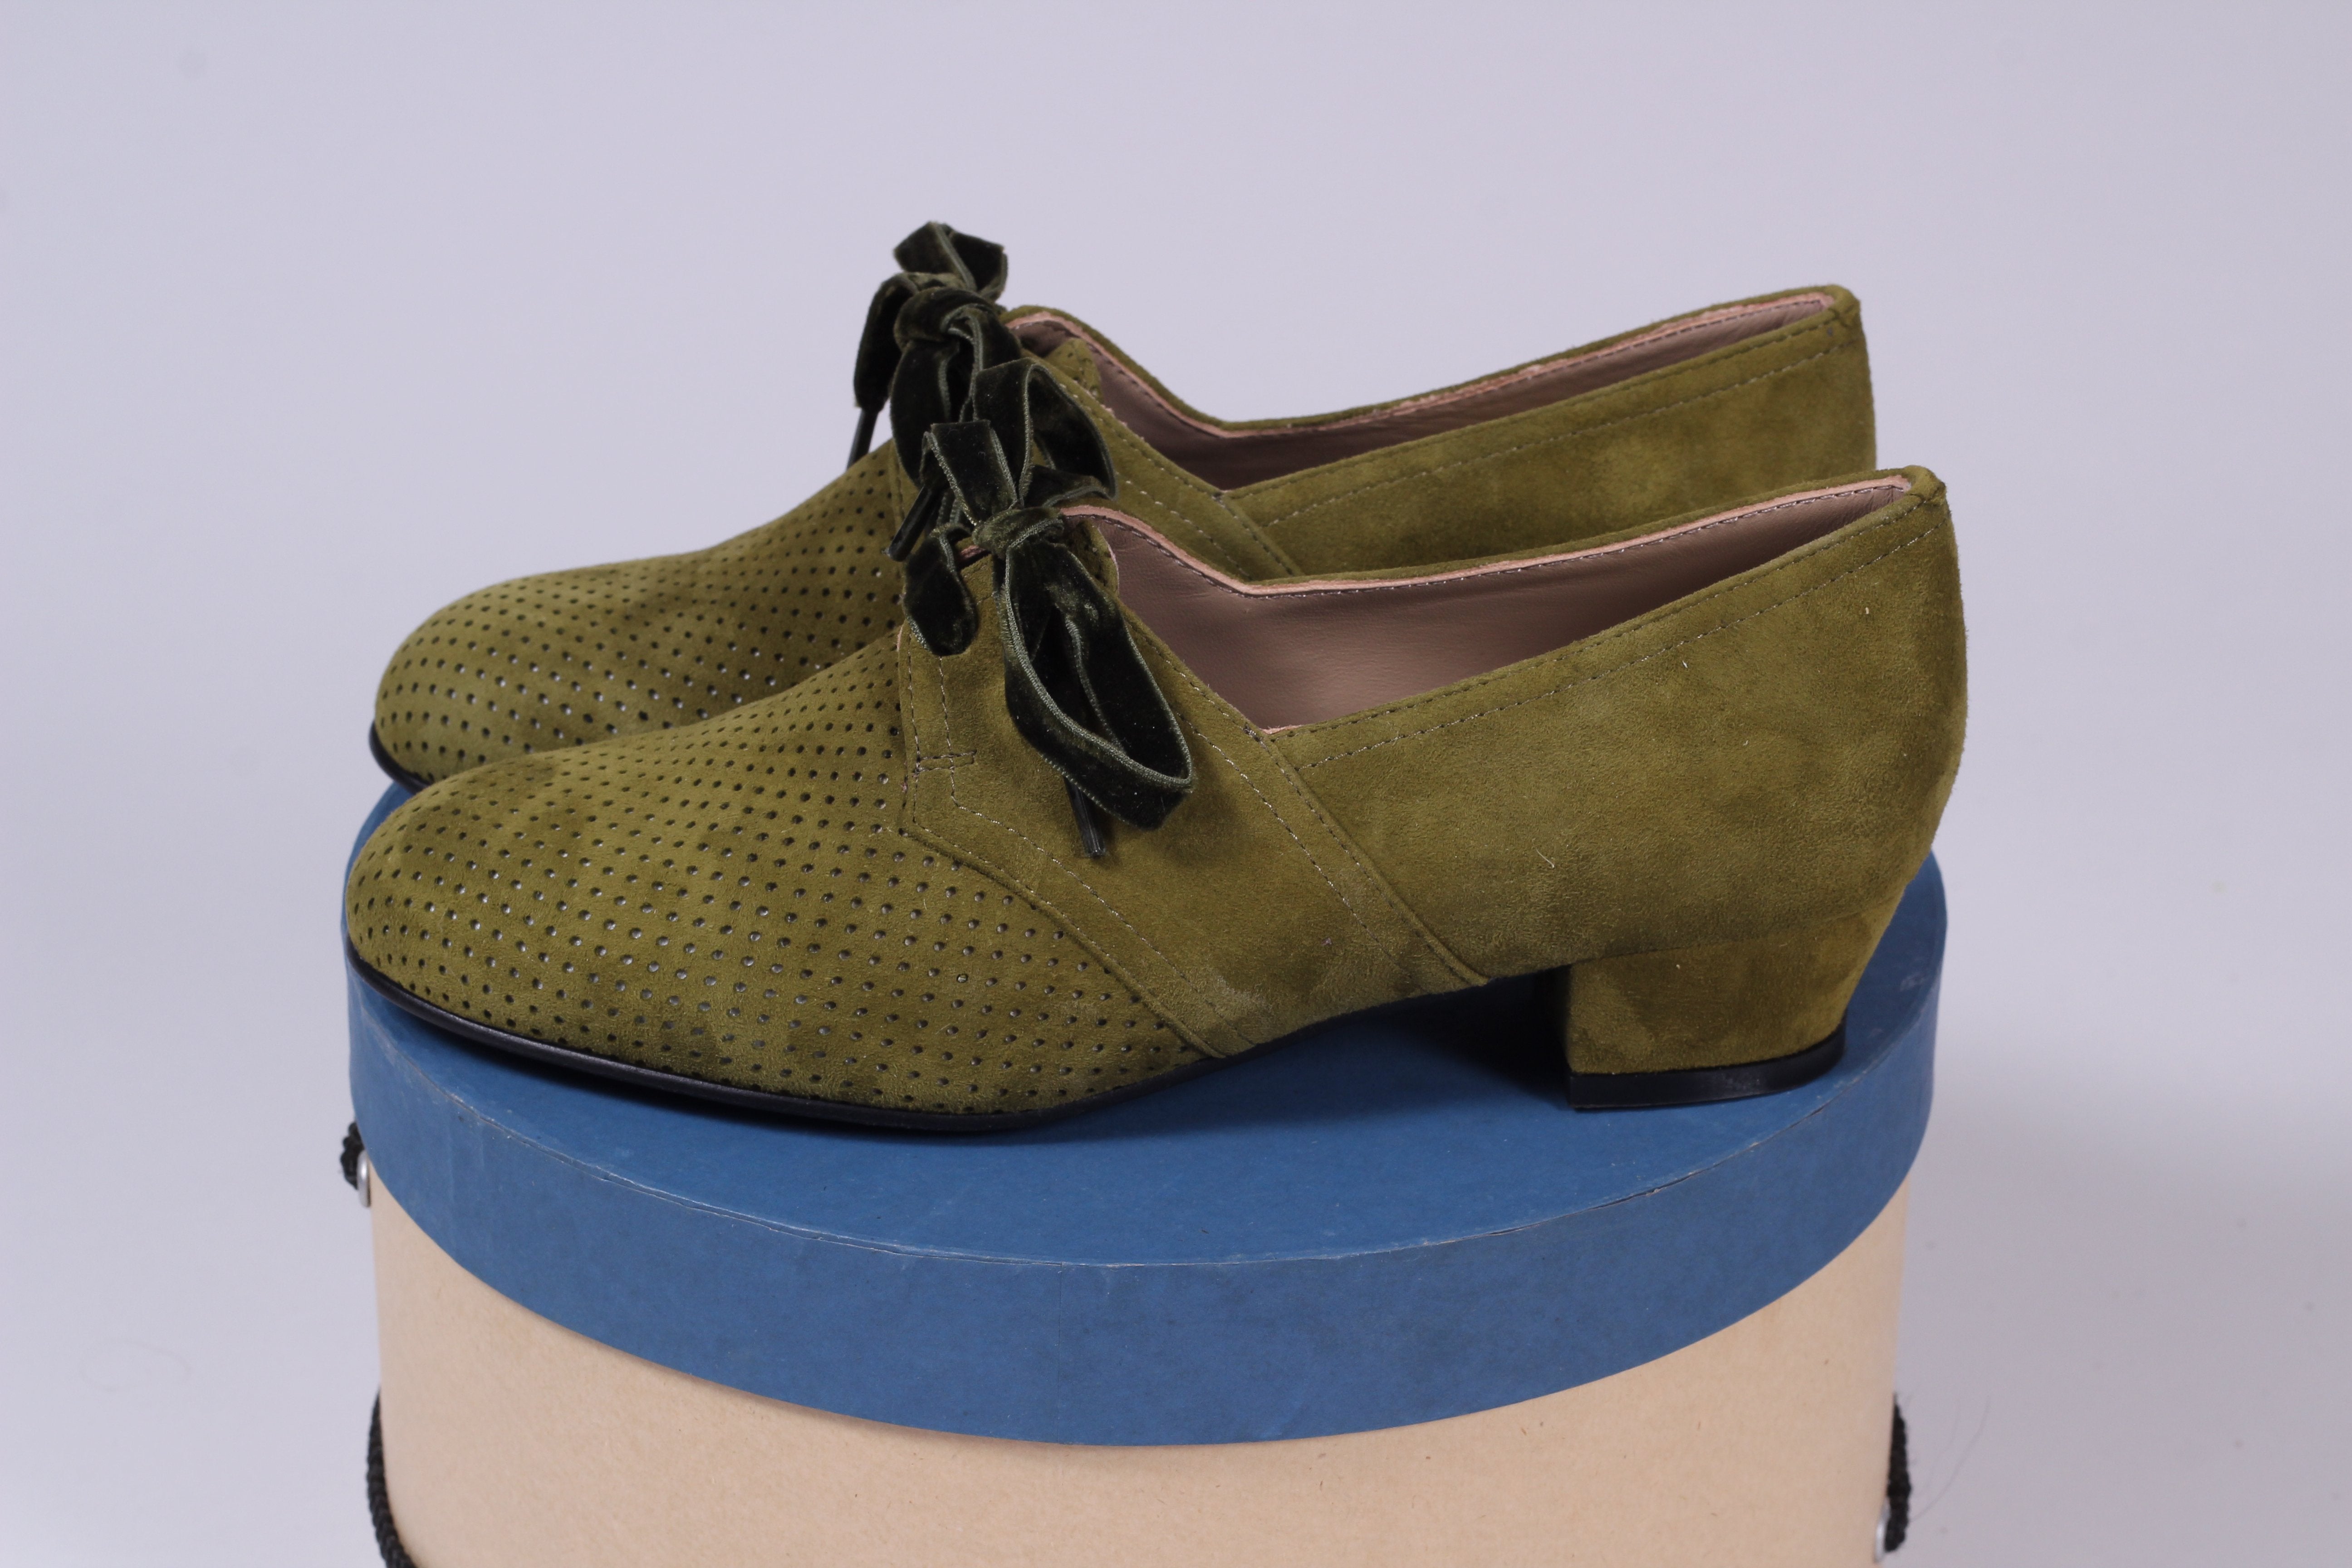 40s Oxford shoes in suede - Low heel - Green - Esther